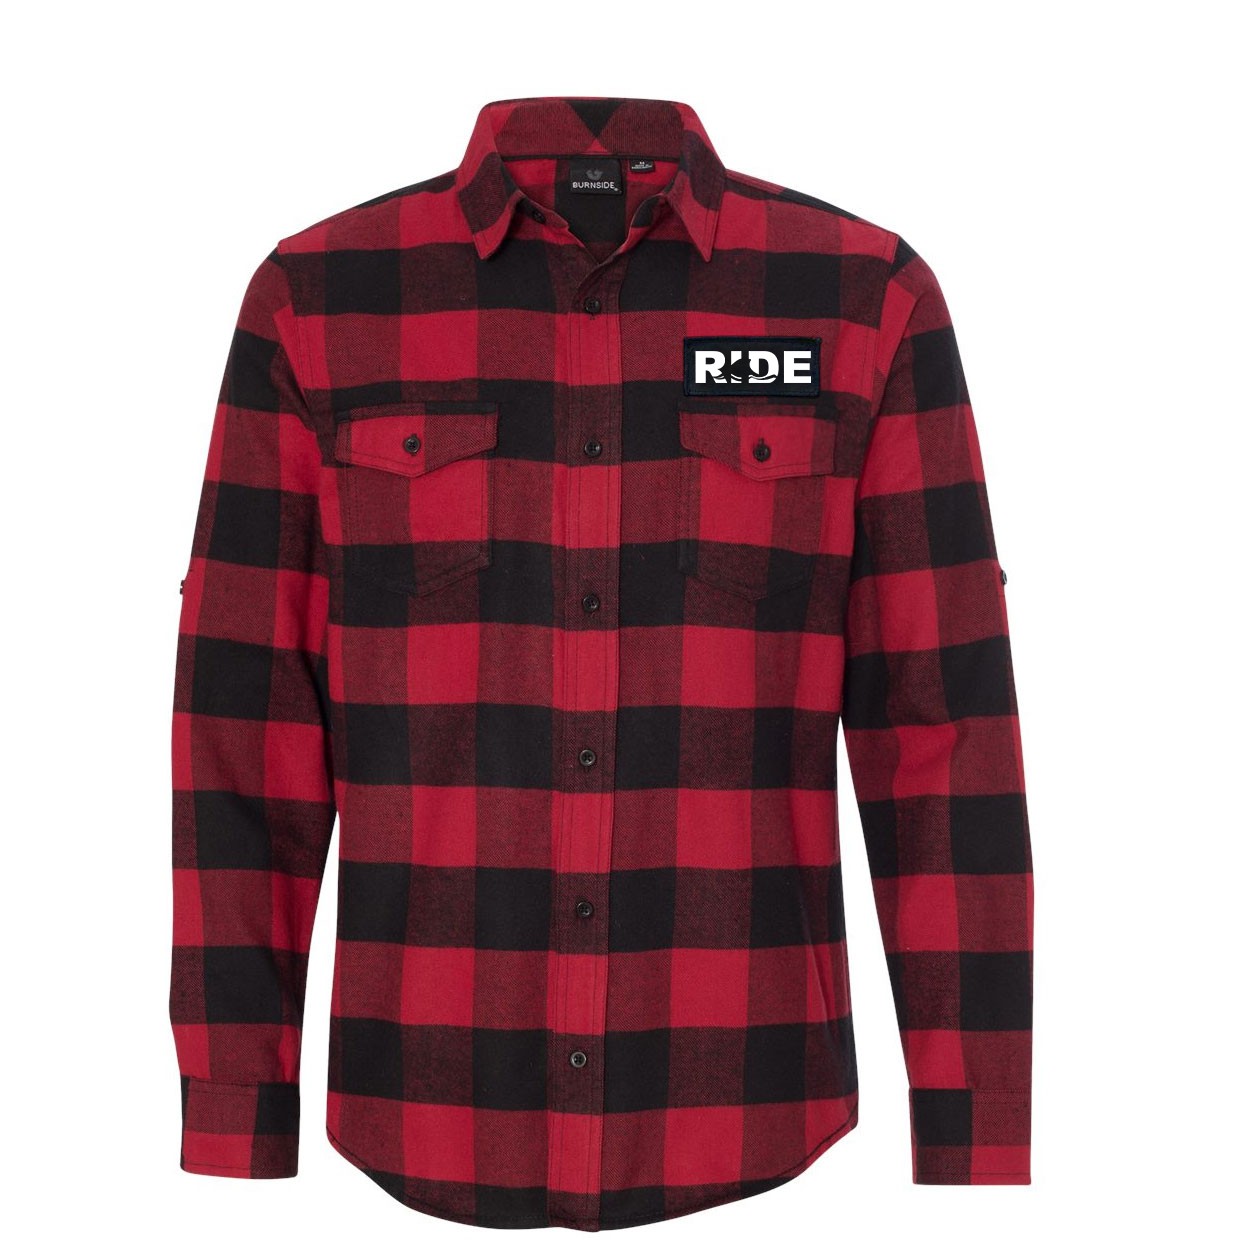 Ride Wave Logo Classic Unisex Long Sleeve Woven Patch Flannel Shirt Red/Black Buffalo (White Logo)